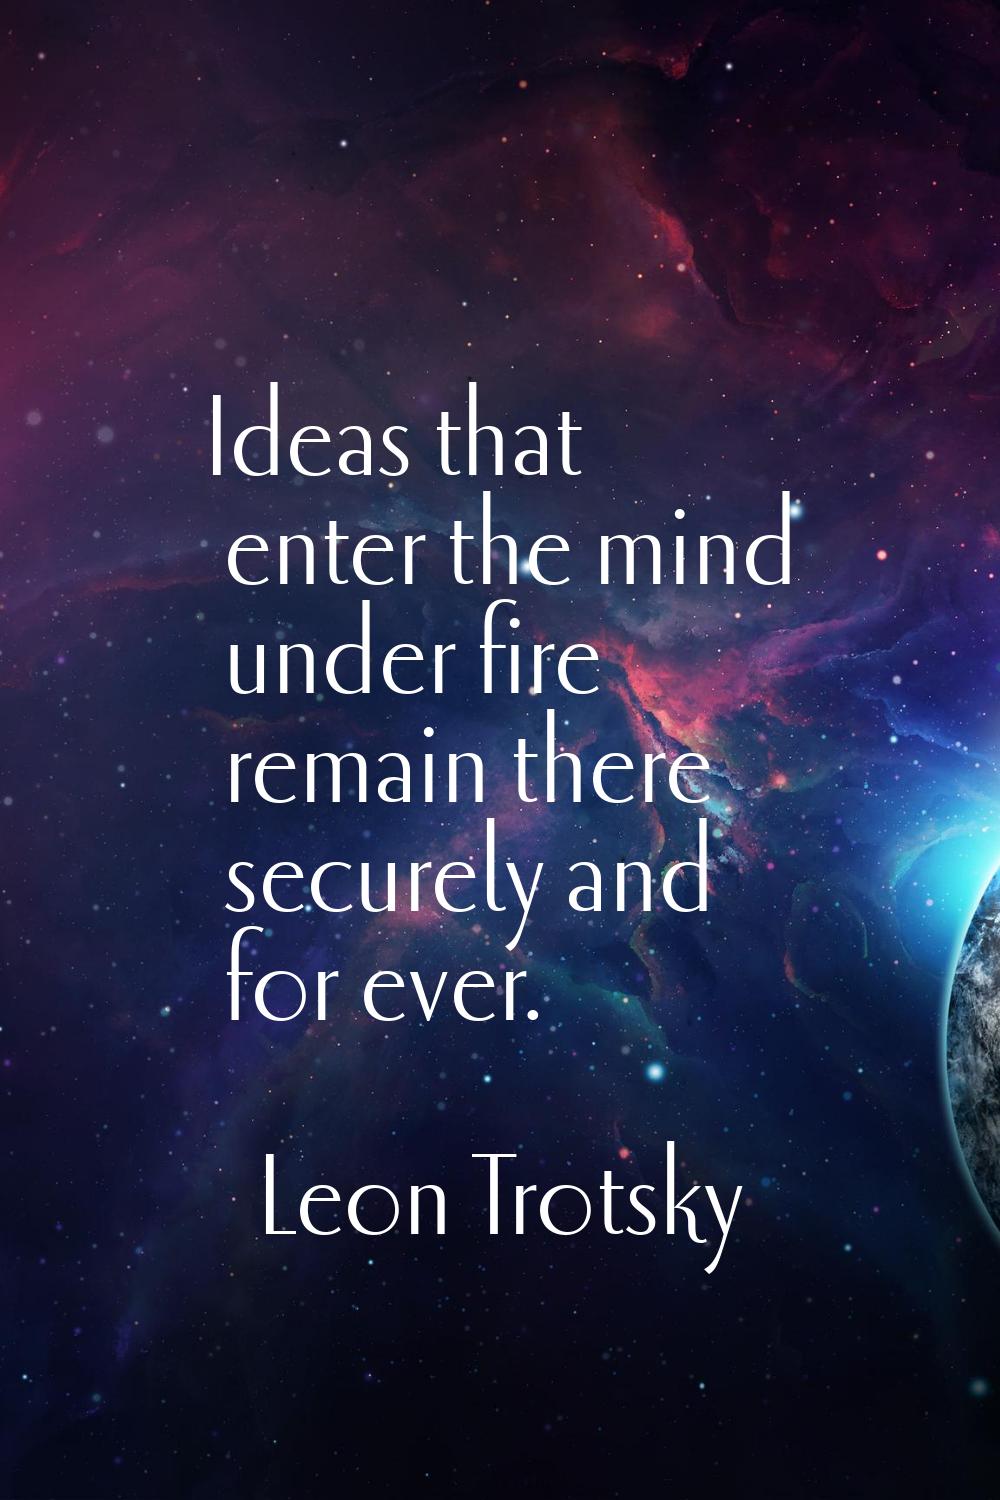 Ideas that enter the mind under fire remain there securely and for ever.